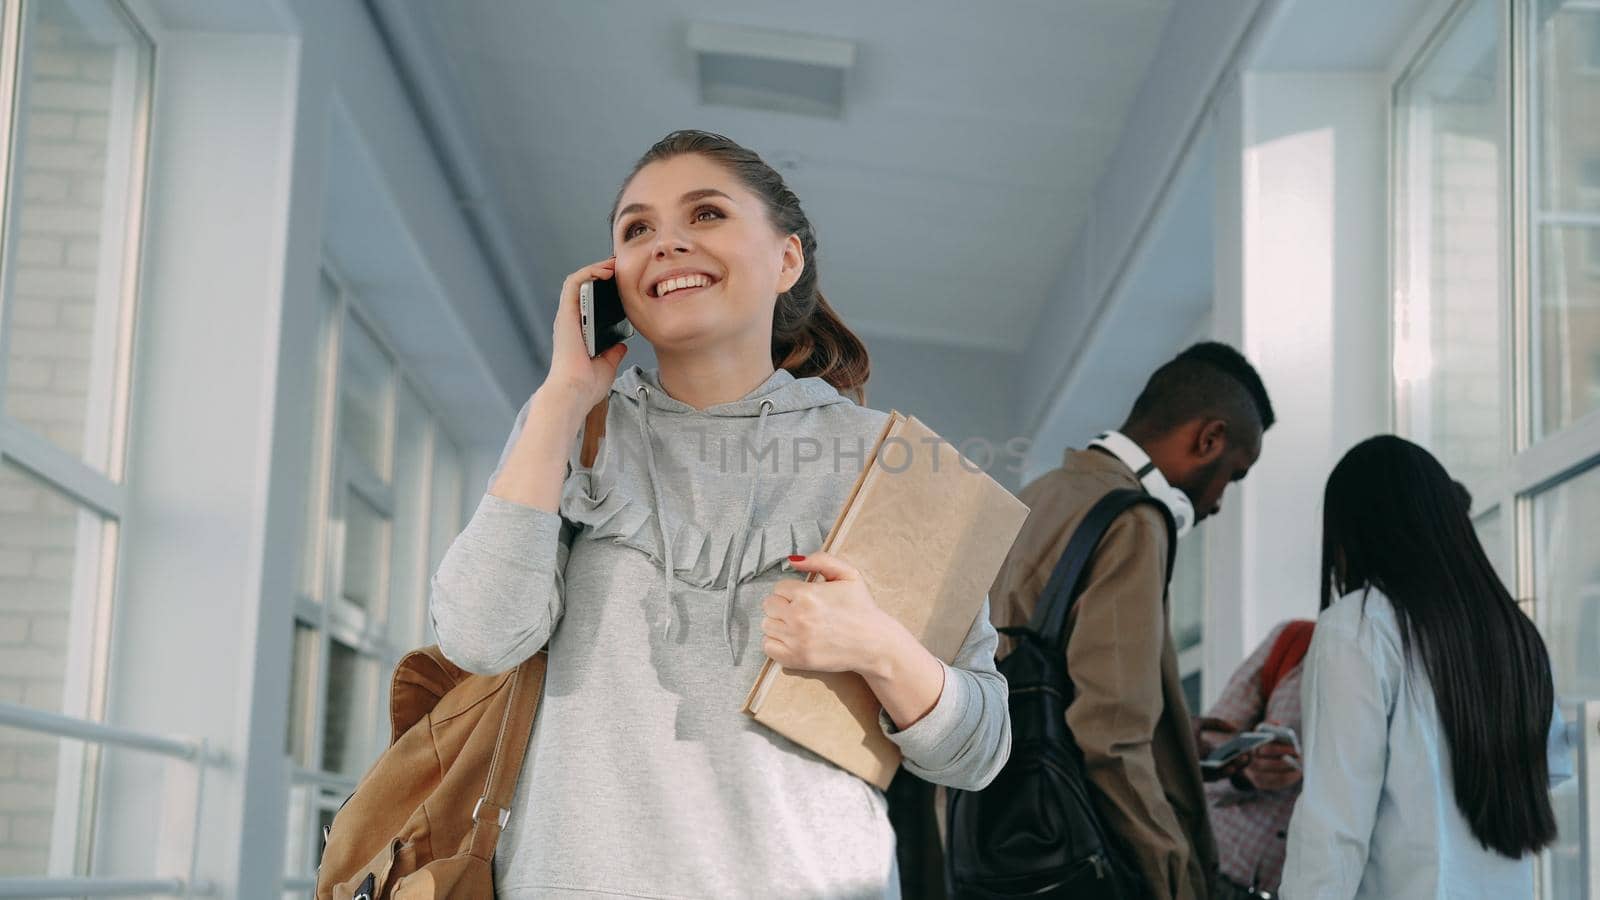 Portrait of young beautiful female student wearing casual clothes talking on phone in positive way while her groupmates are standing behind her discussing something by silverkblack